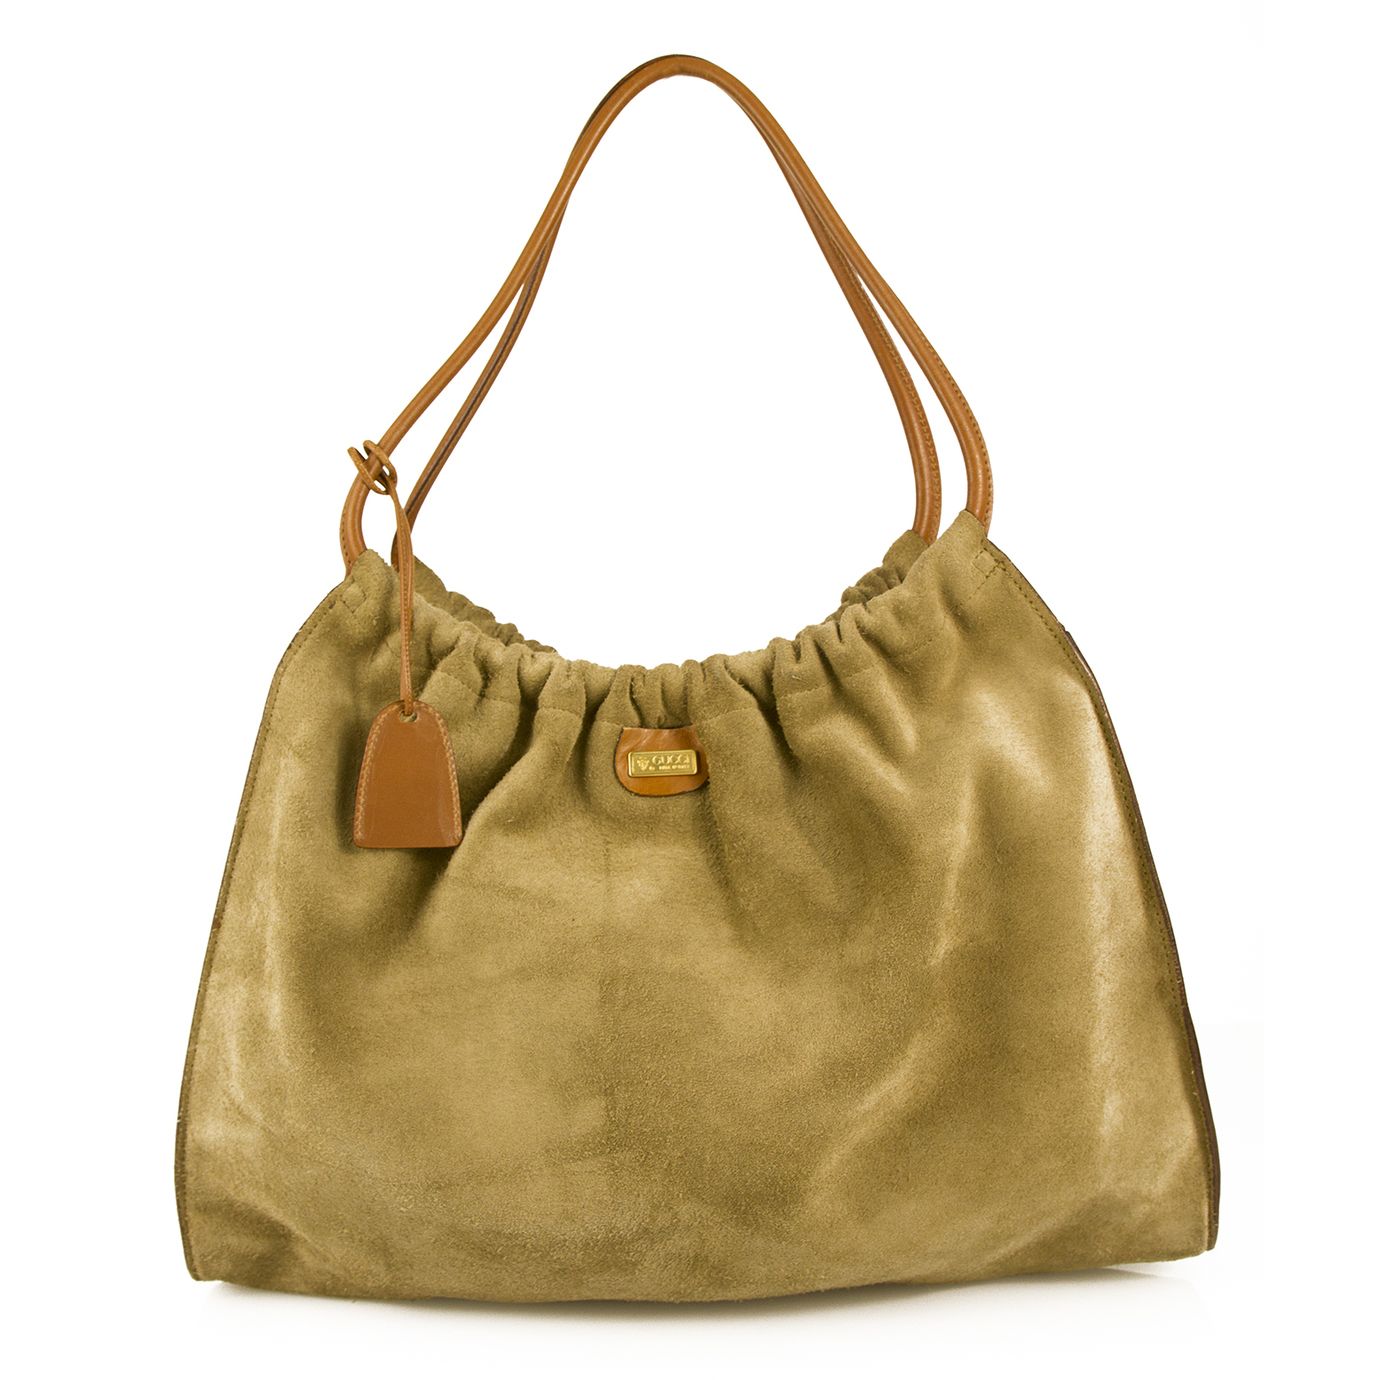 GUCCI Green Suede Tan Brown Leather Pouch Like Shoulder Bag Handbag - 0